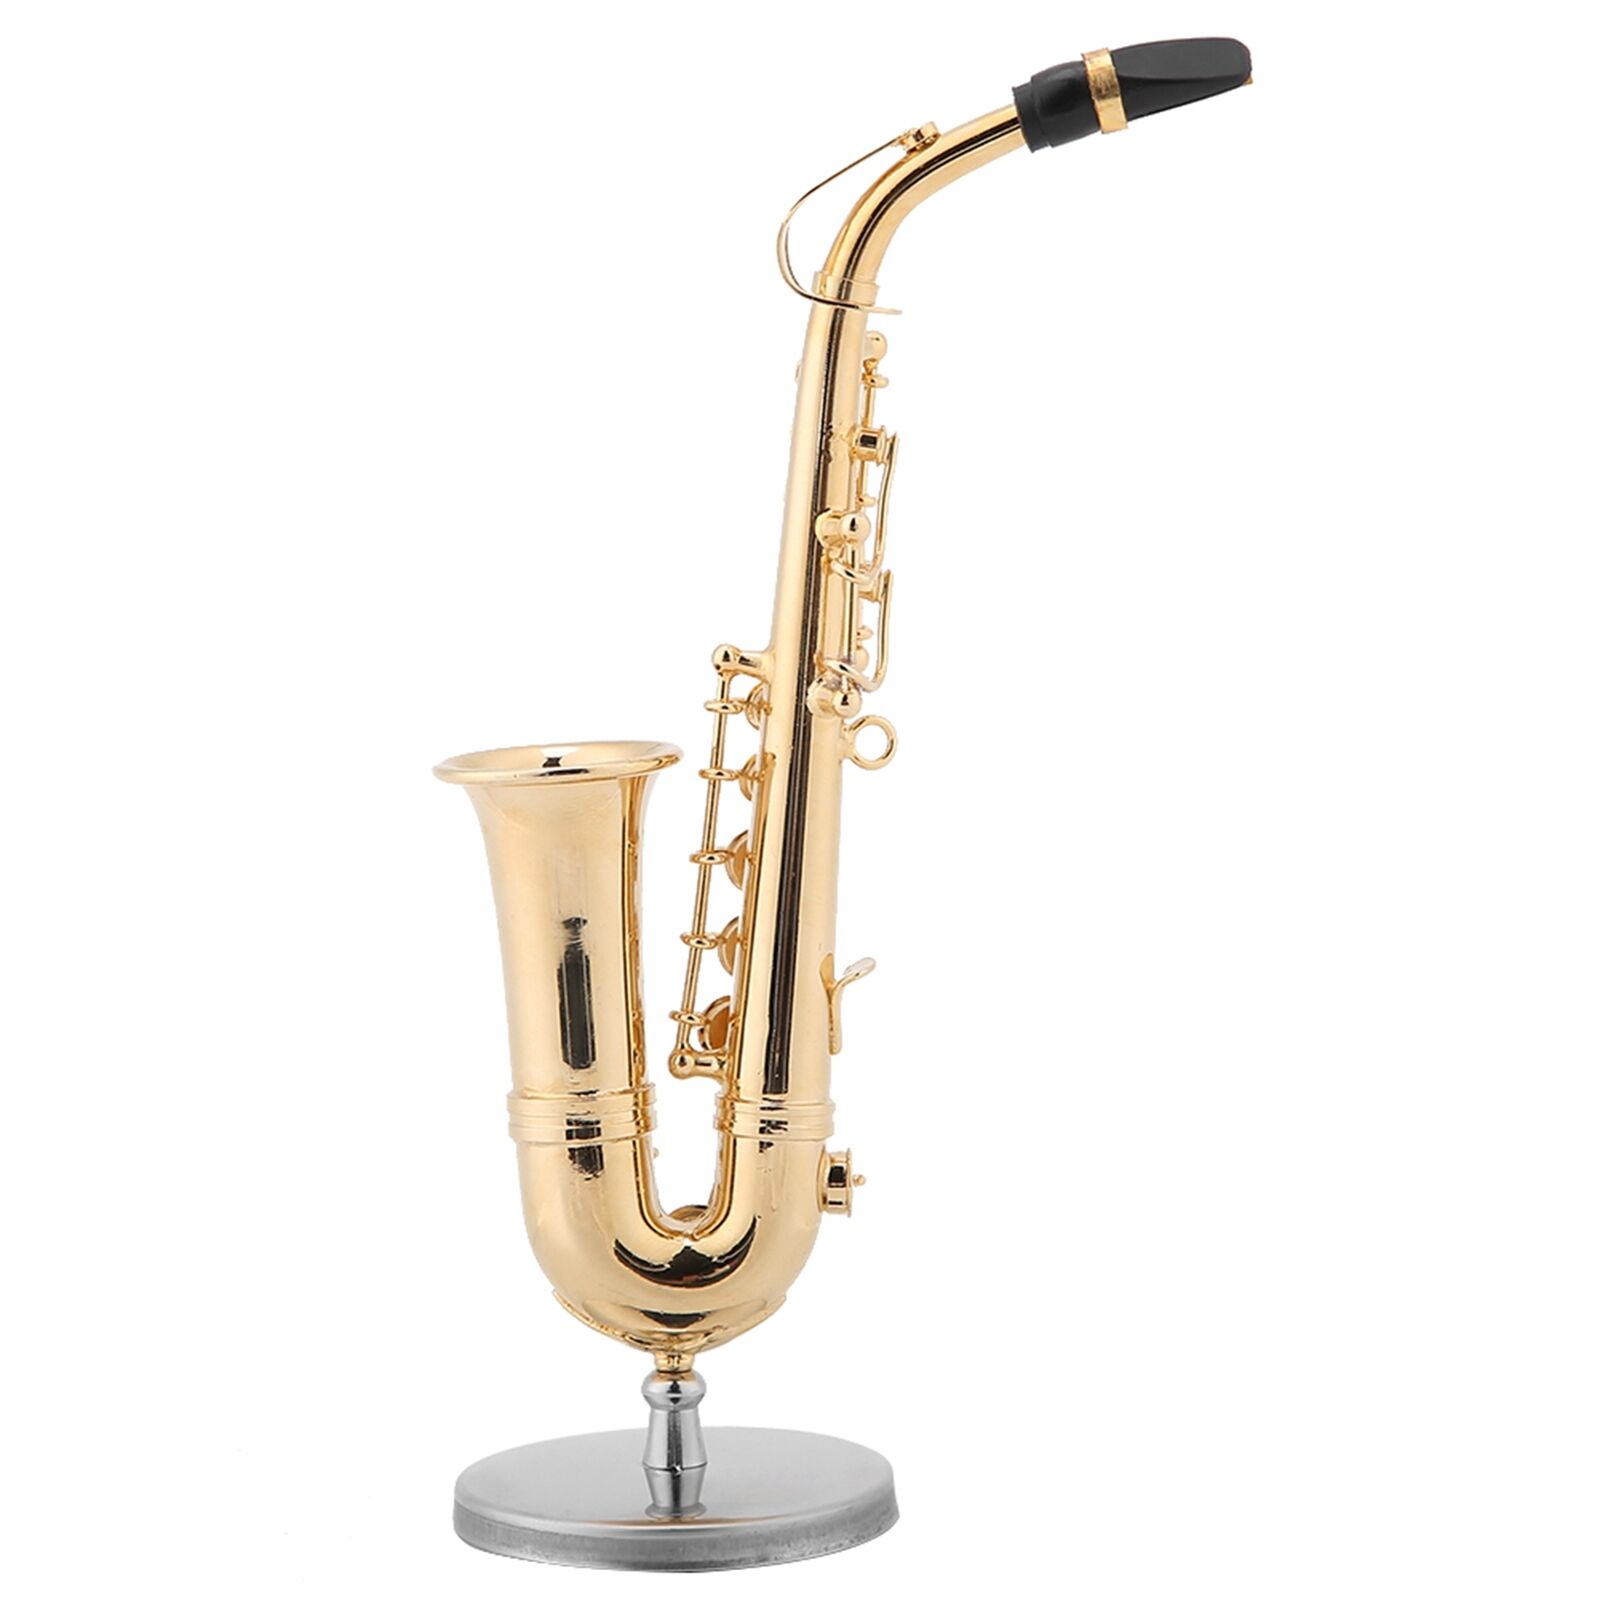 Miniature Saxophone Replica With Stand And Case High Quality Craftwork EUY